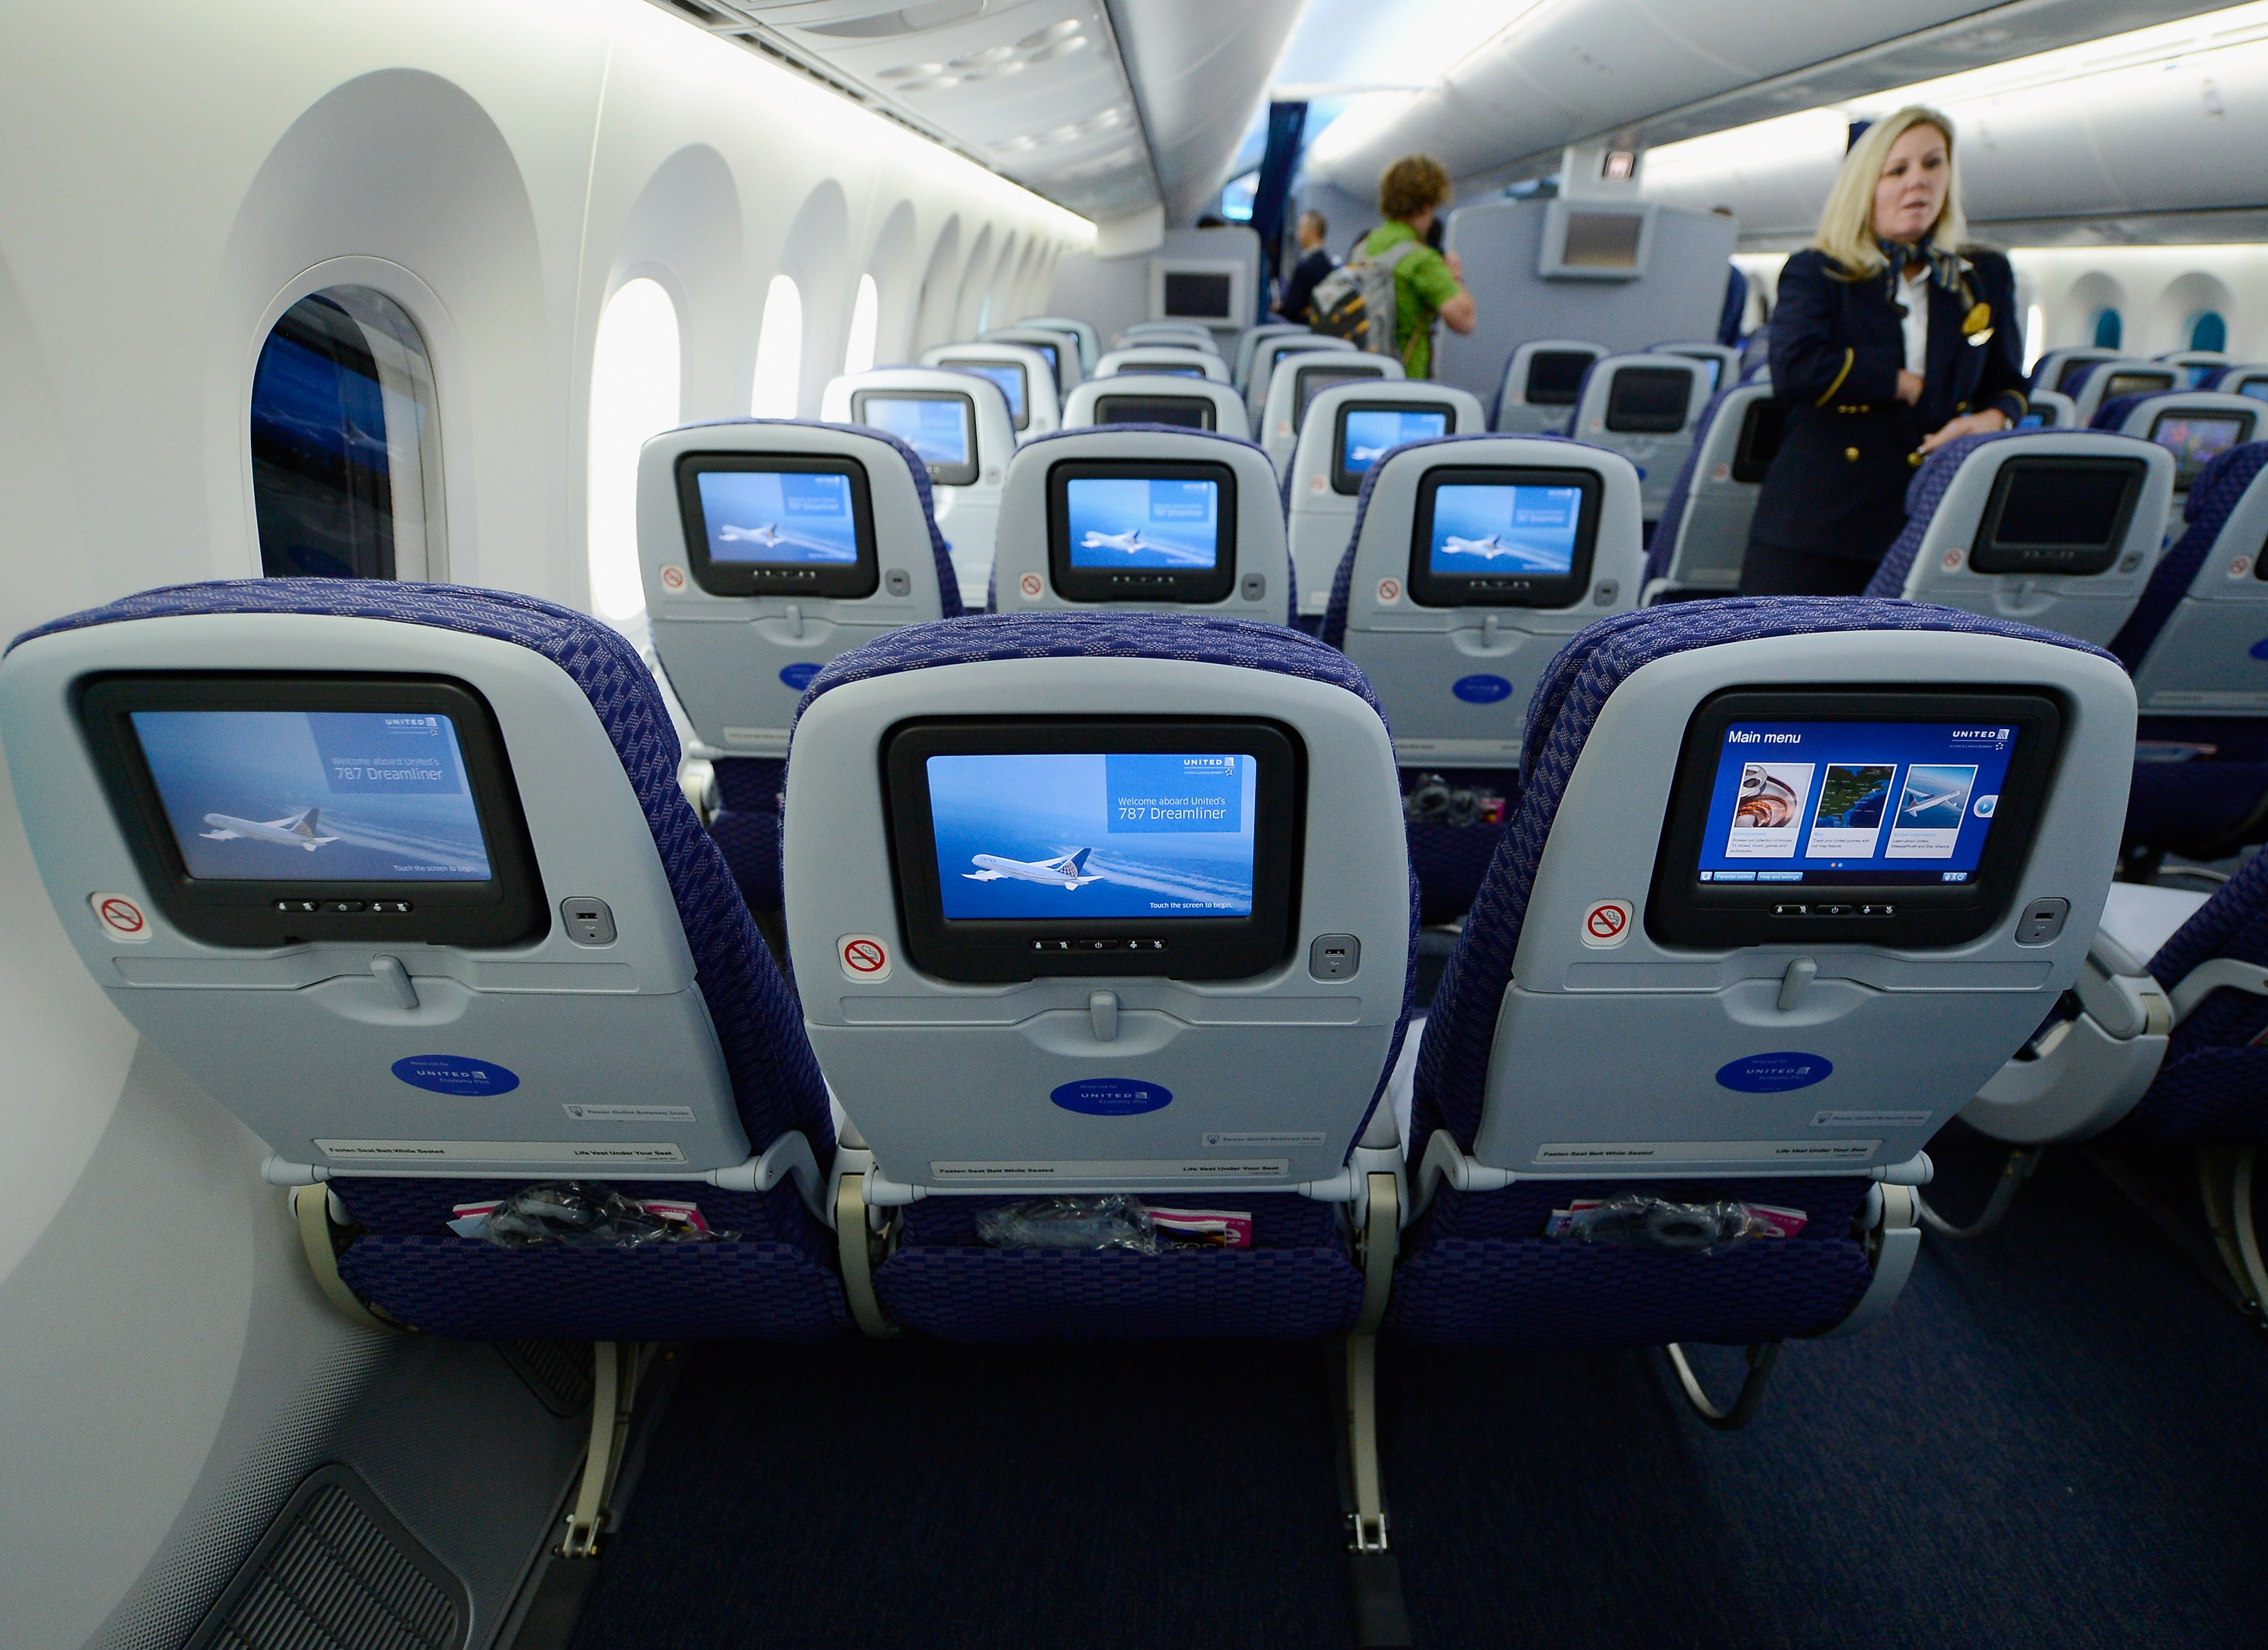 United Airlines flight attendant Tina looks at personal entertainment systems on the new Boeing 787 Dreamliner during a tour of the jet at Los Angeles International Airport on Nov. 30, 2012. (Kevork Djansezian—Getty Images)